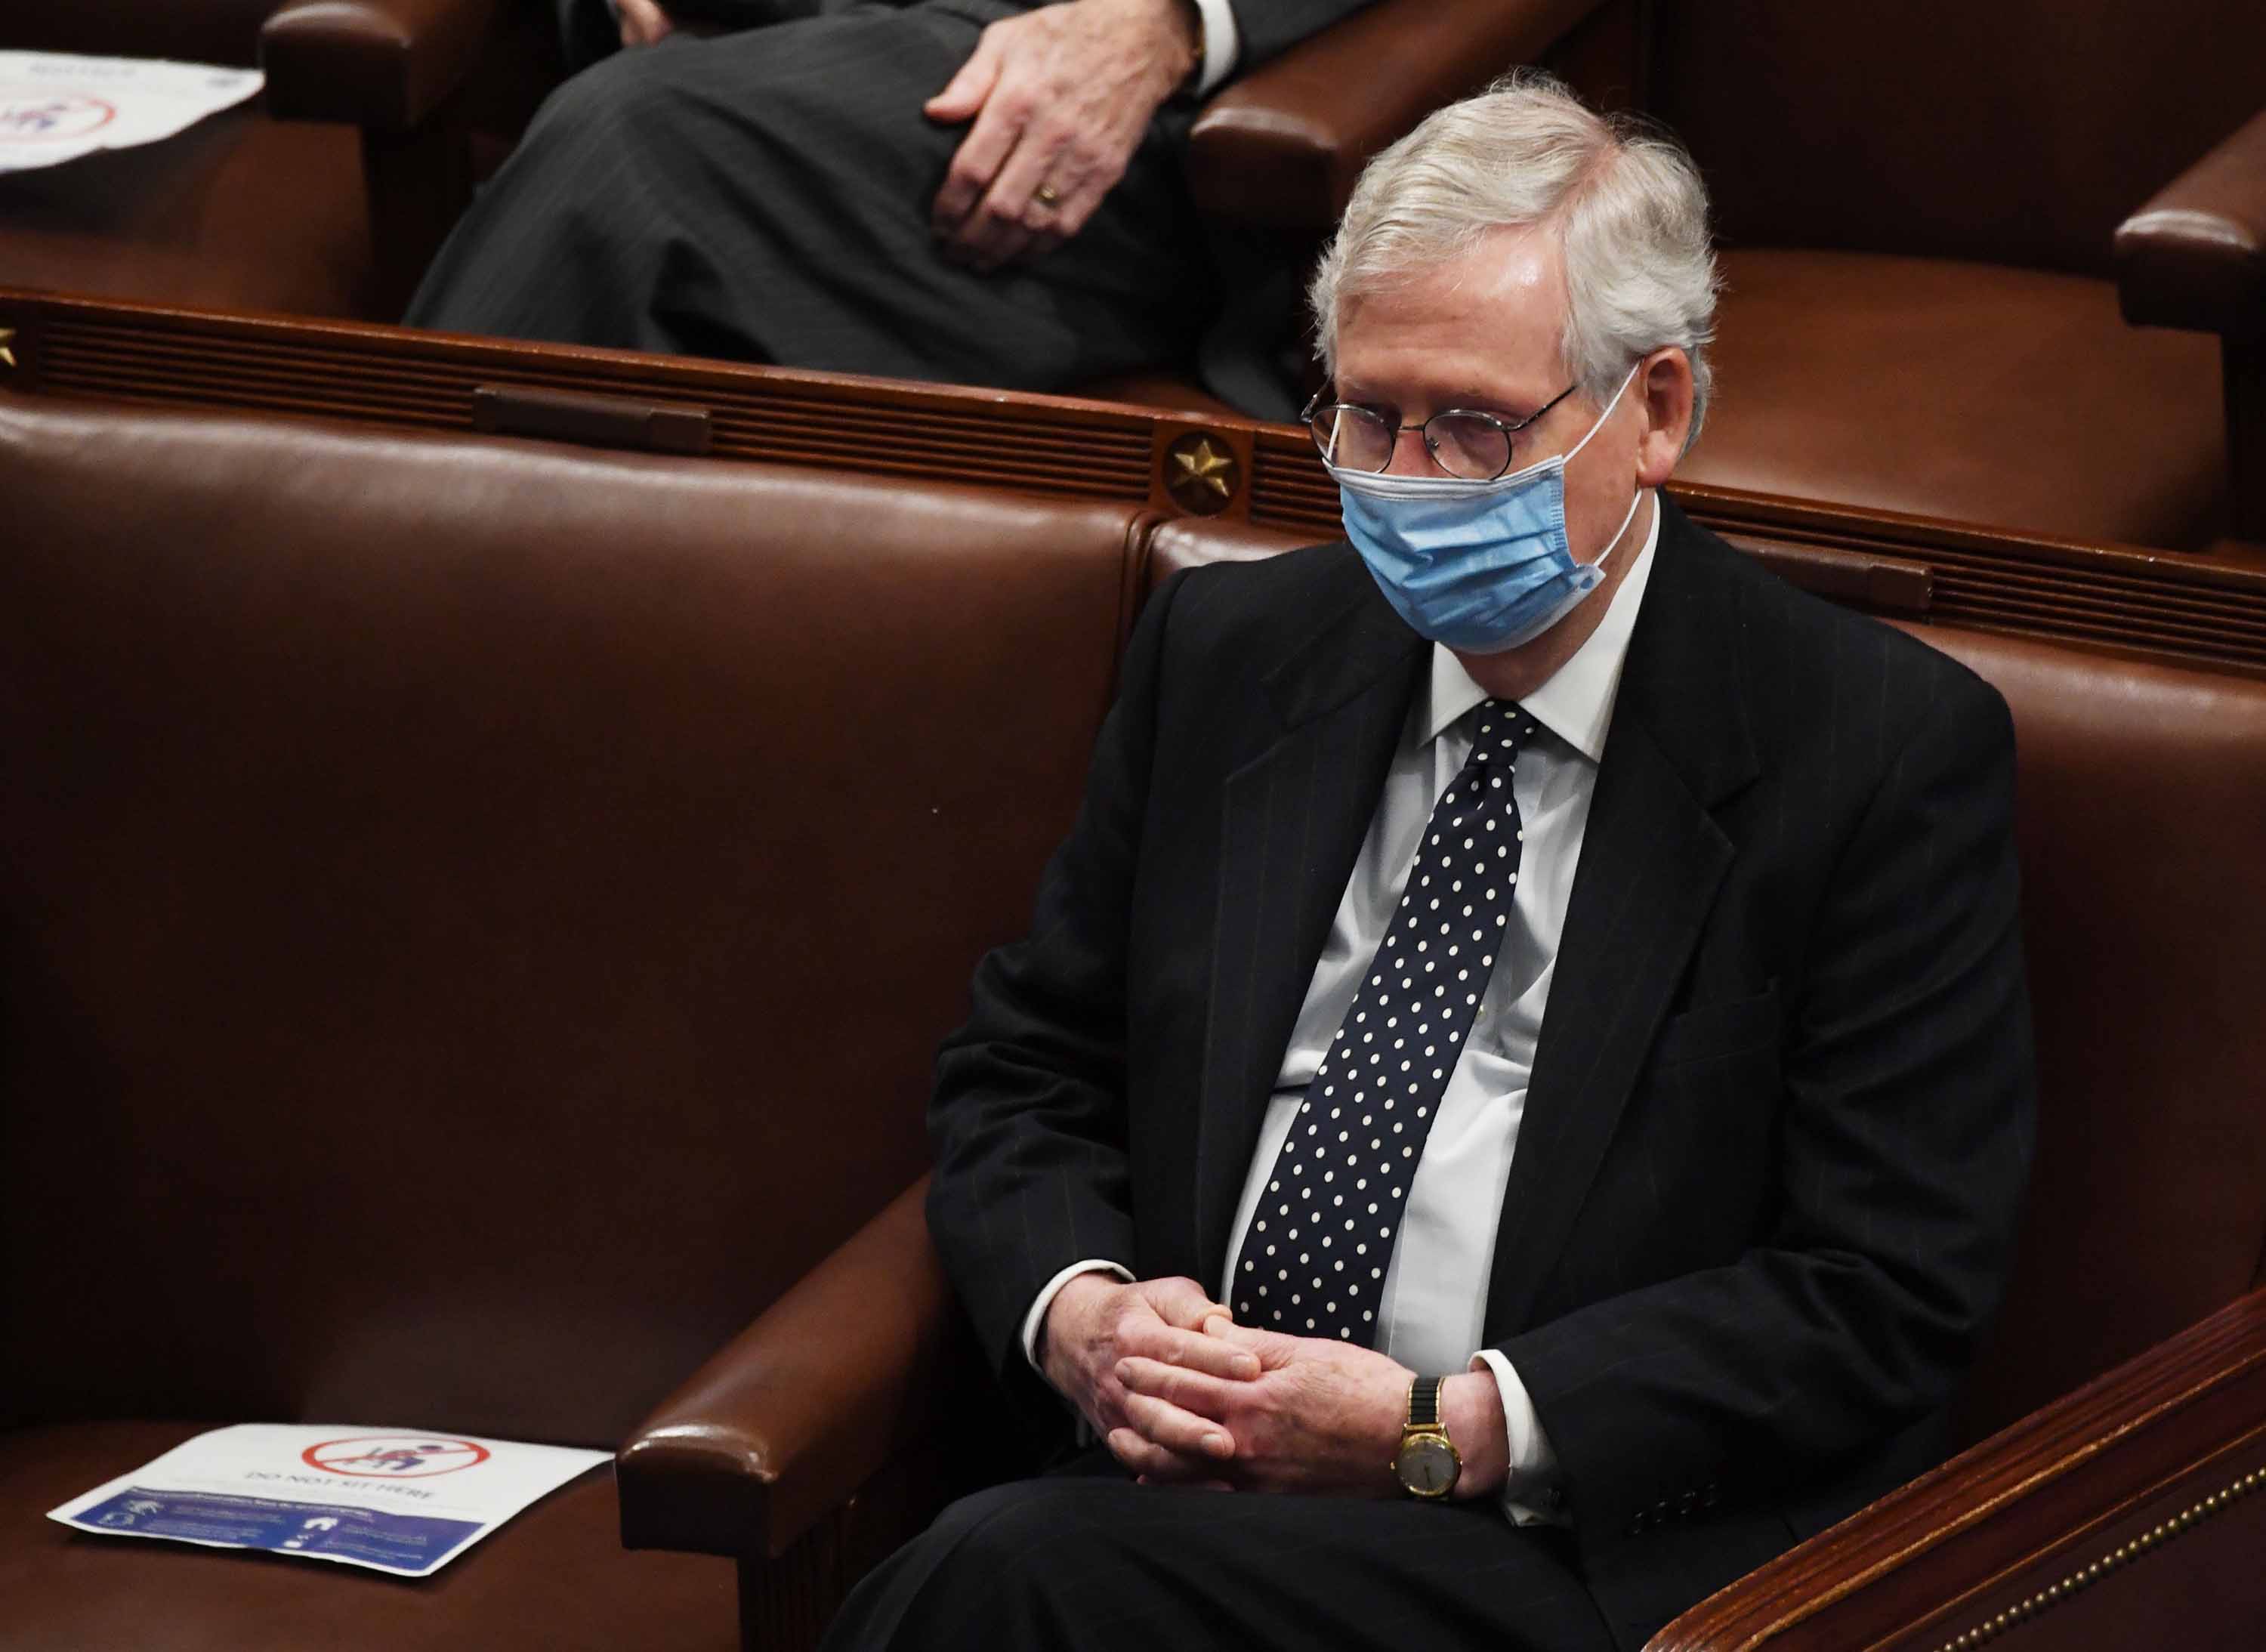 Senate Majority Leader Mitch McConnell attends a joint session of Congress after the session resumed, following the insurrection at the US Capitol in Washington, DC, on January 6.